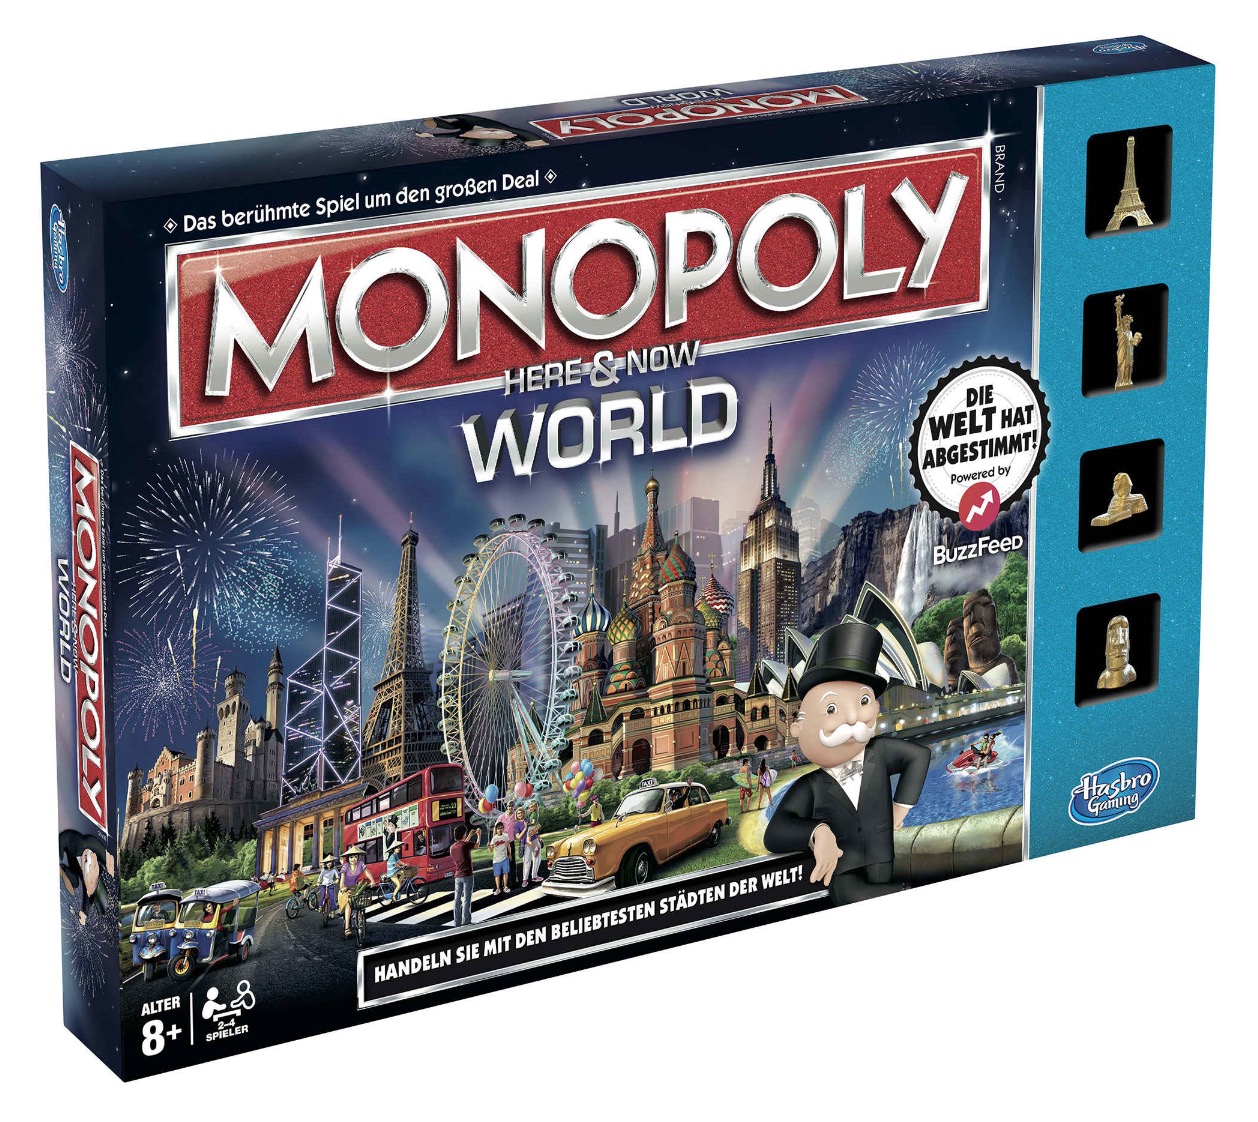 Hasbro Monopoly Here & Now World Edition ab 11,99 Euro